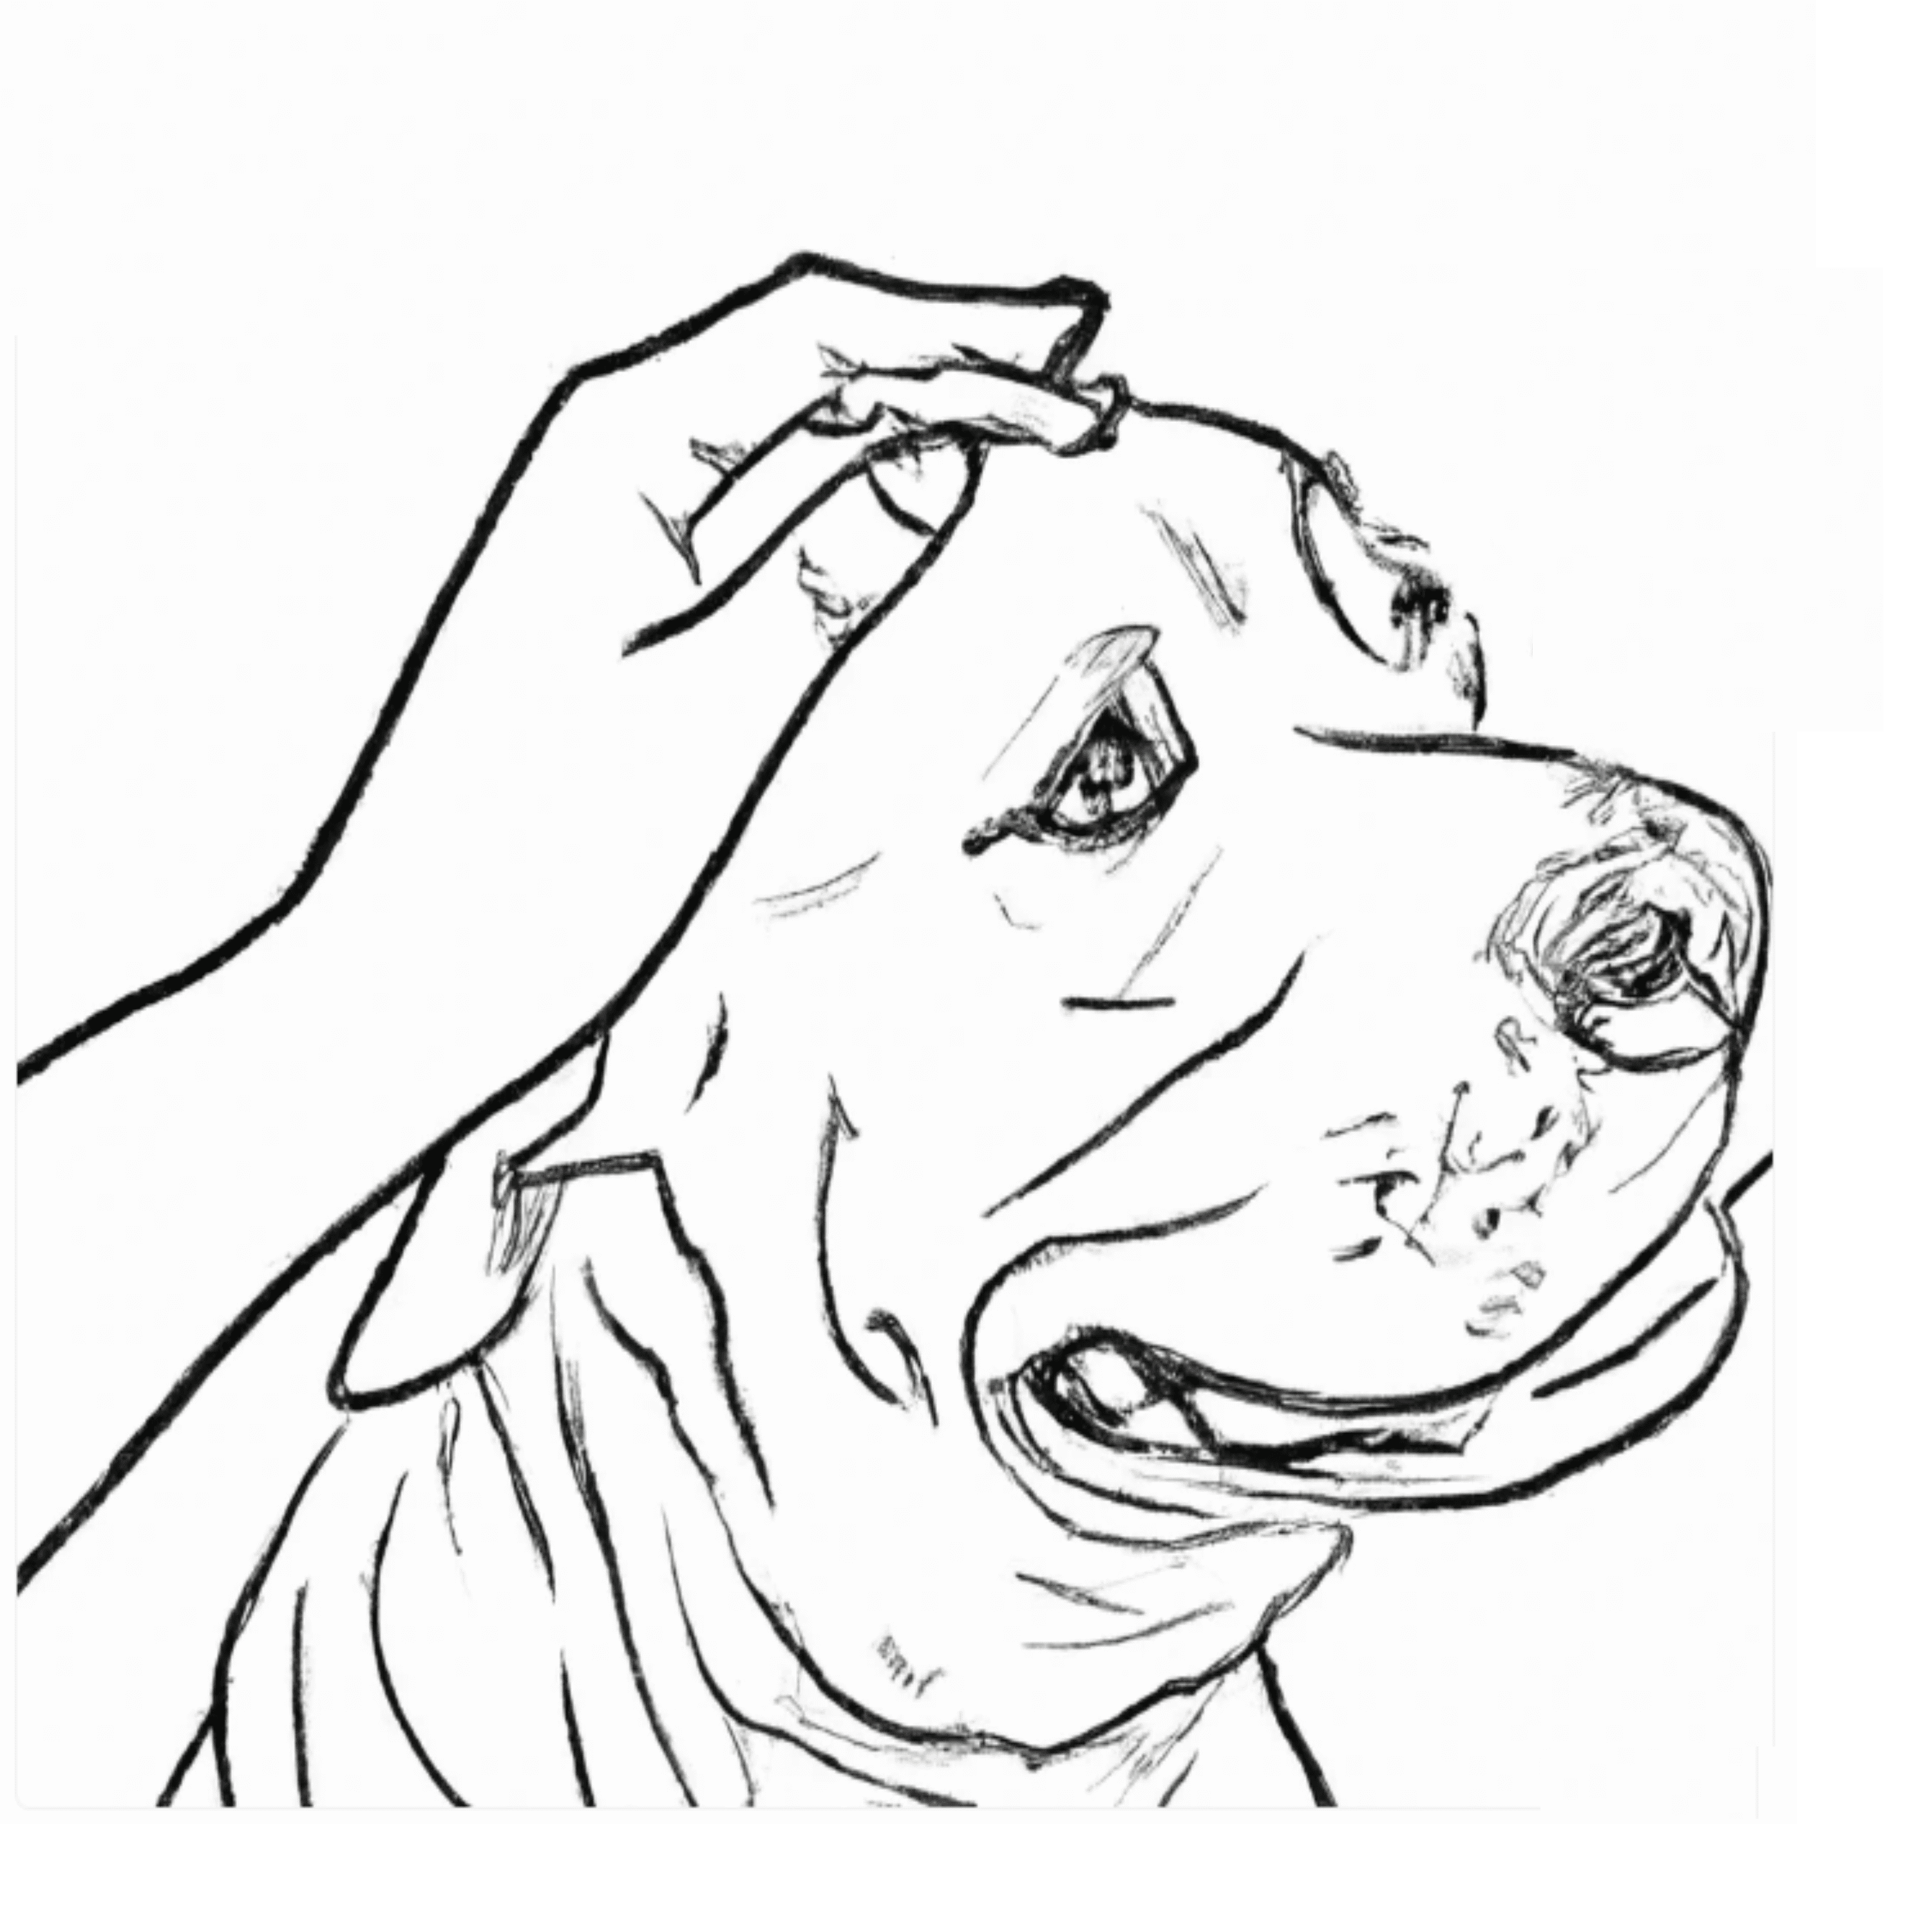 Line drawing of a hand patting a dog